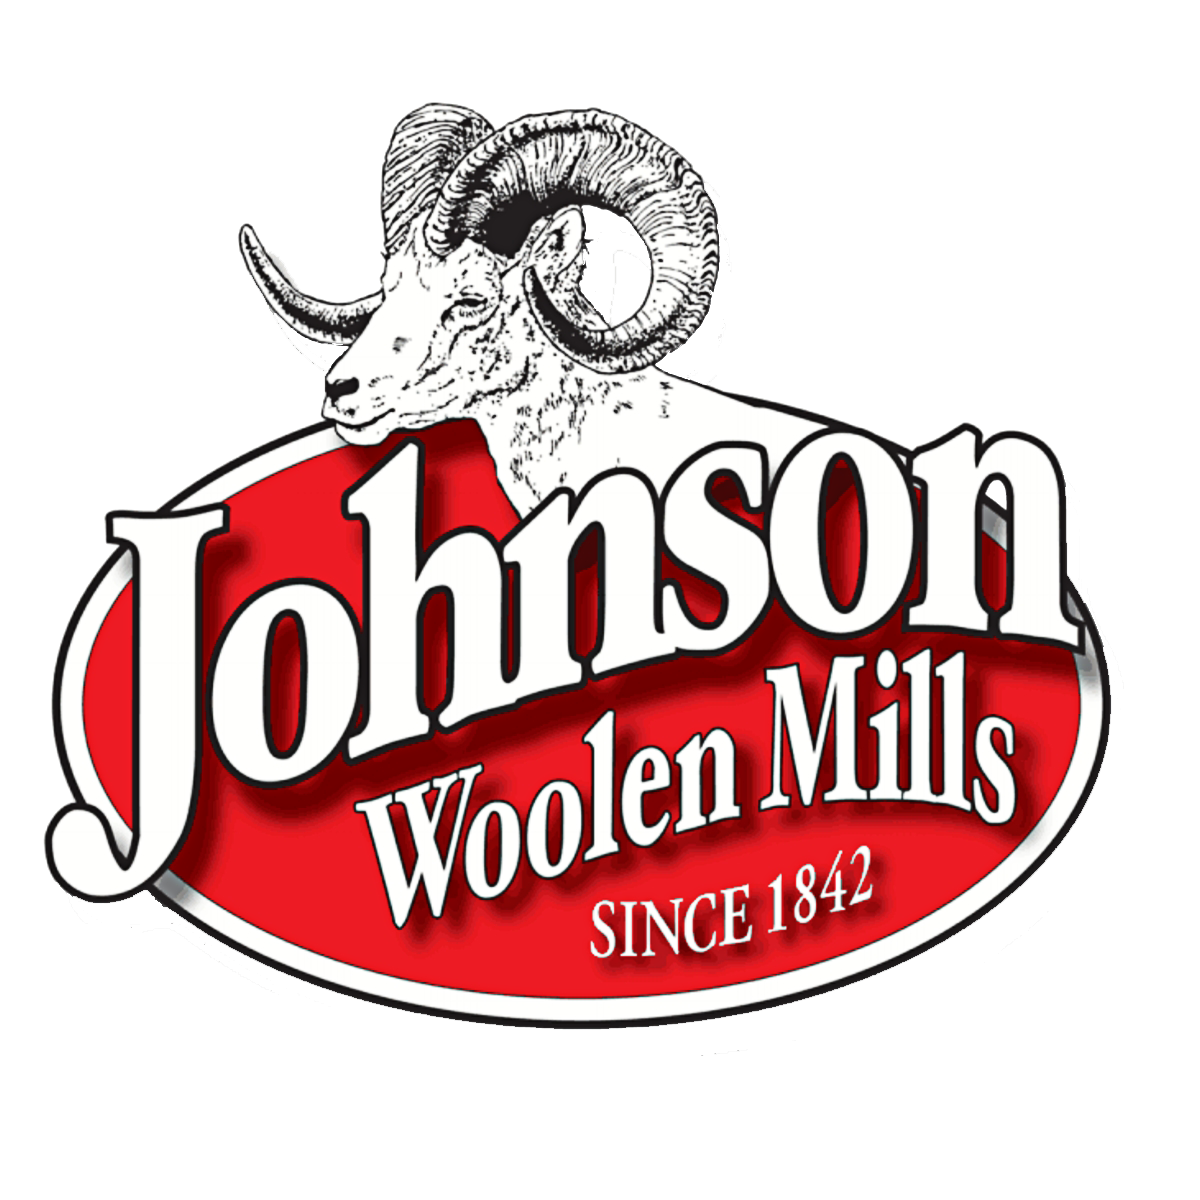 Johnson Woolen Mills logo, red background with white letters & white ram image